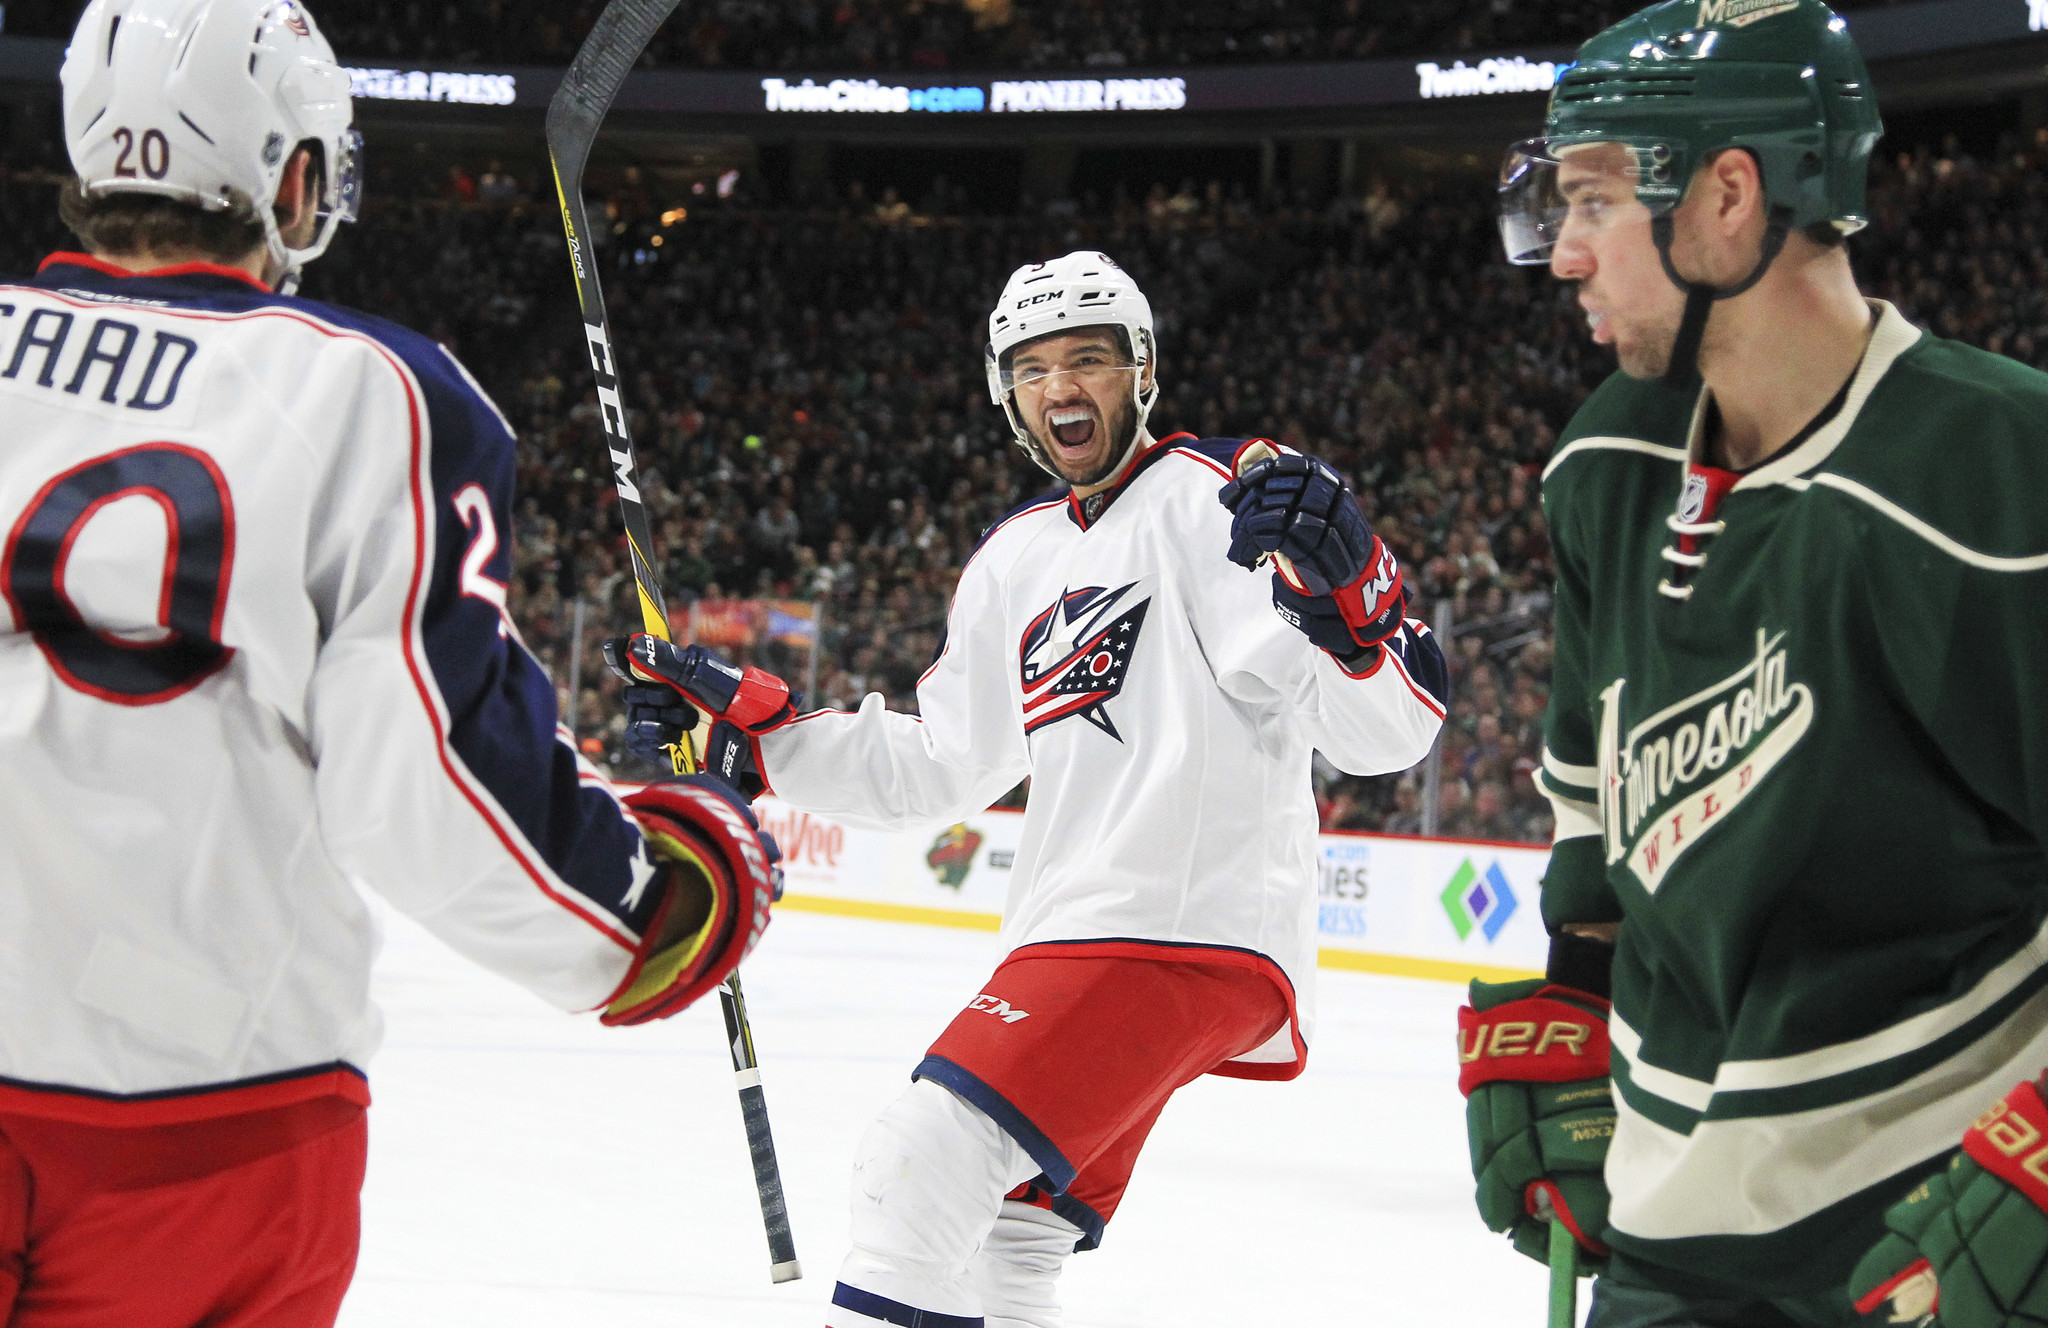 Blue Jackets stretch win streak to 15 games, stop Wild run at 12 in row